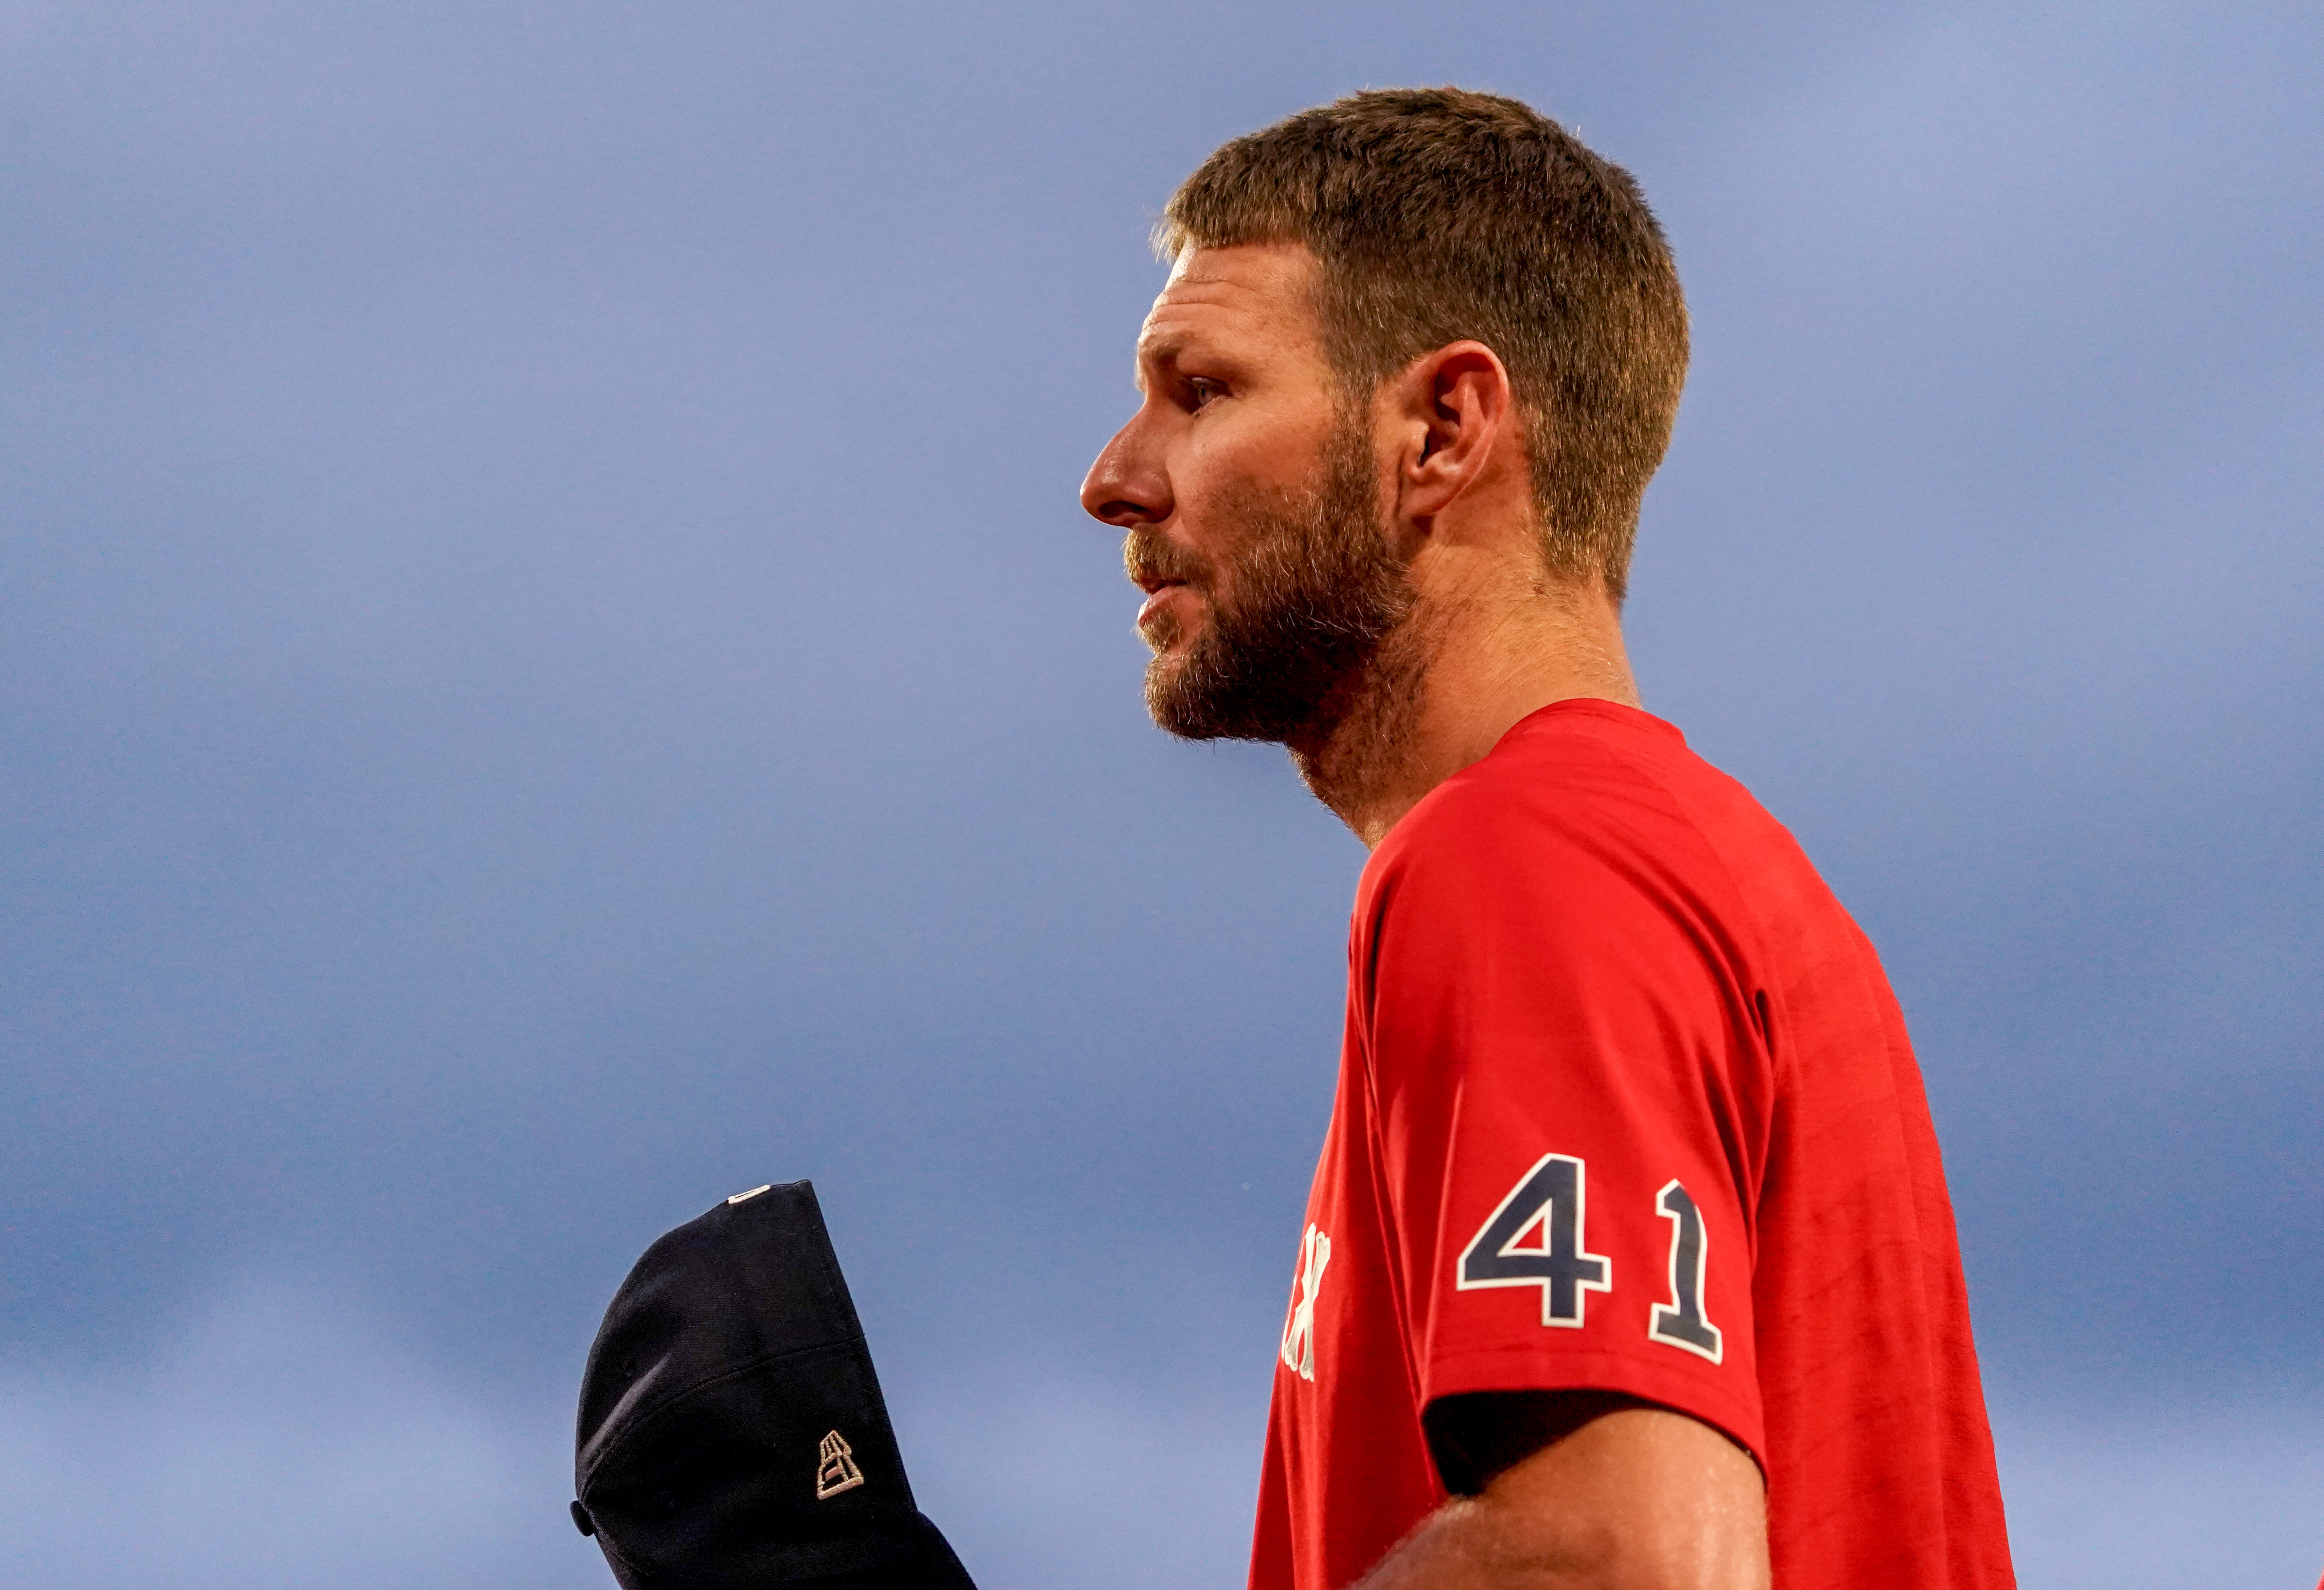 After he threw a bullpen session, Red Sox hope Chris Sale's next step is  facing live hitters - The Boston Globe